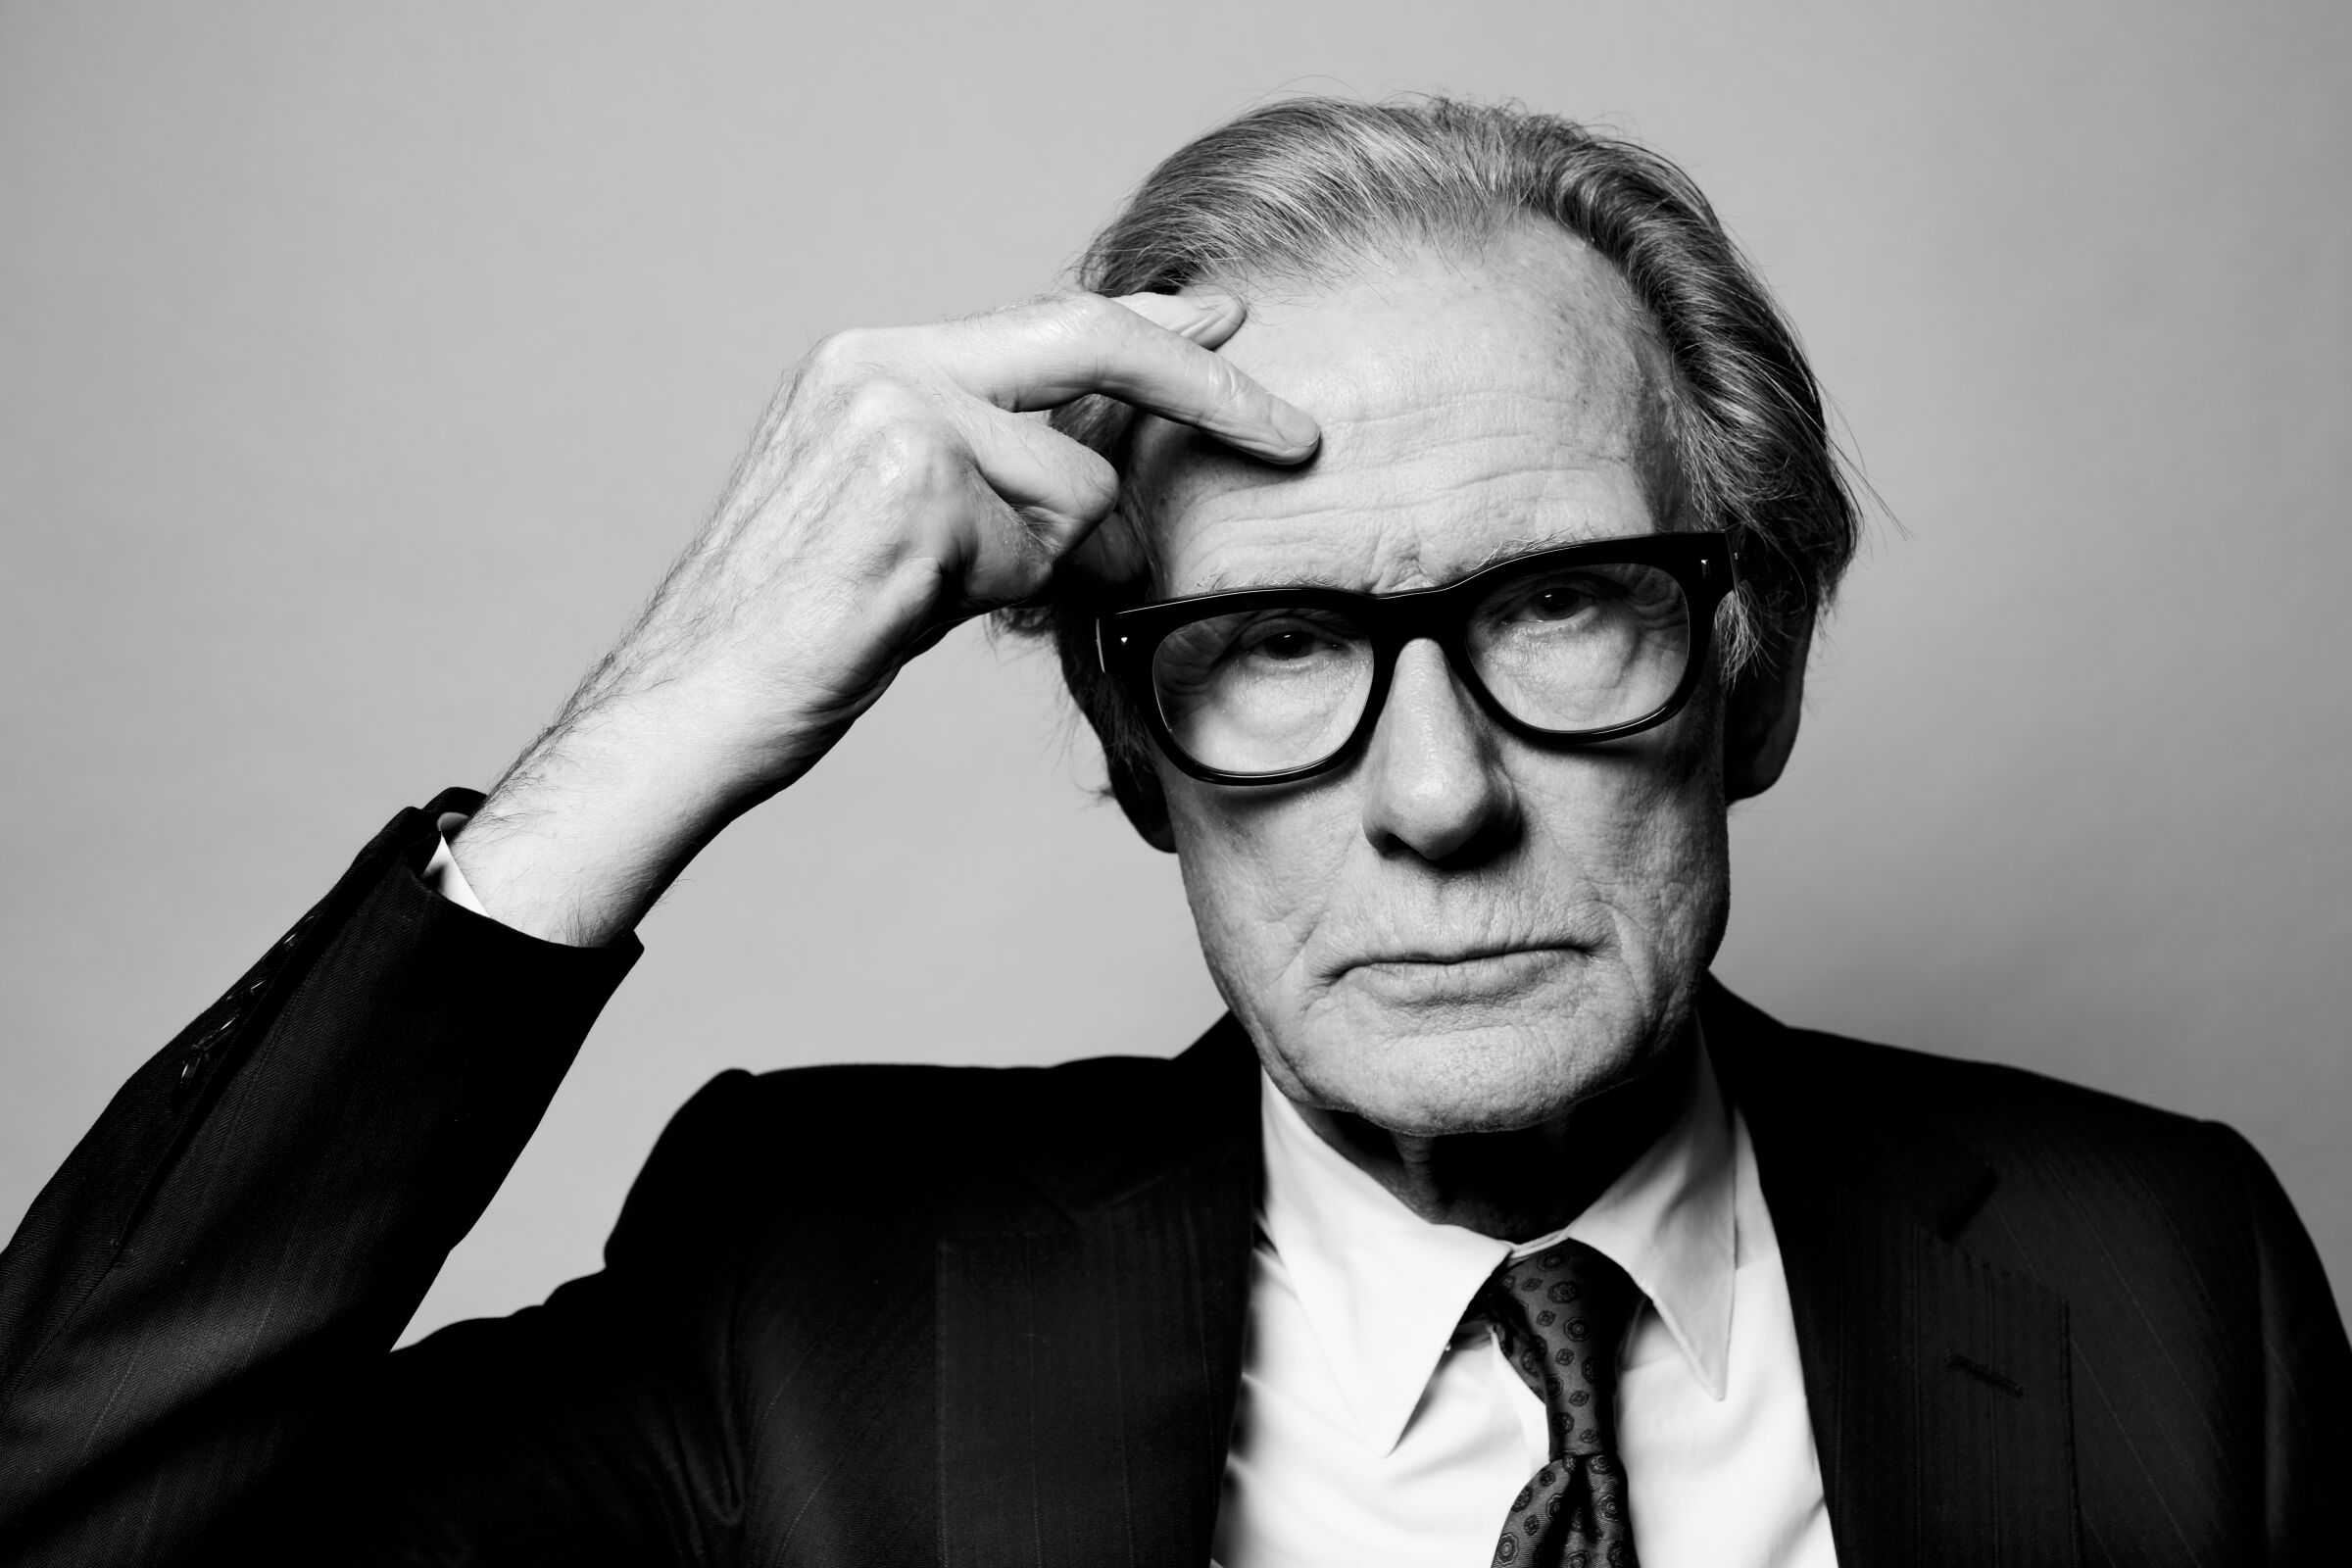 A black-and-white portrait of Bill Nighy, dressed in a dark suit and putting a hand to his forehead. 